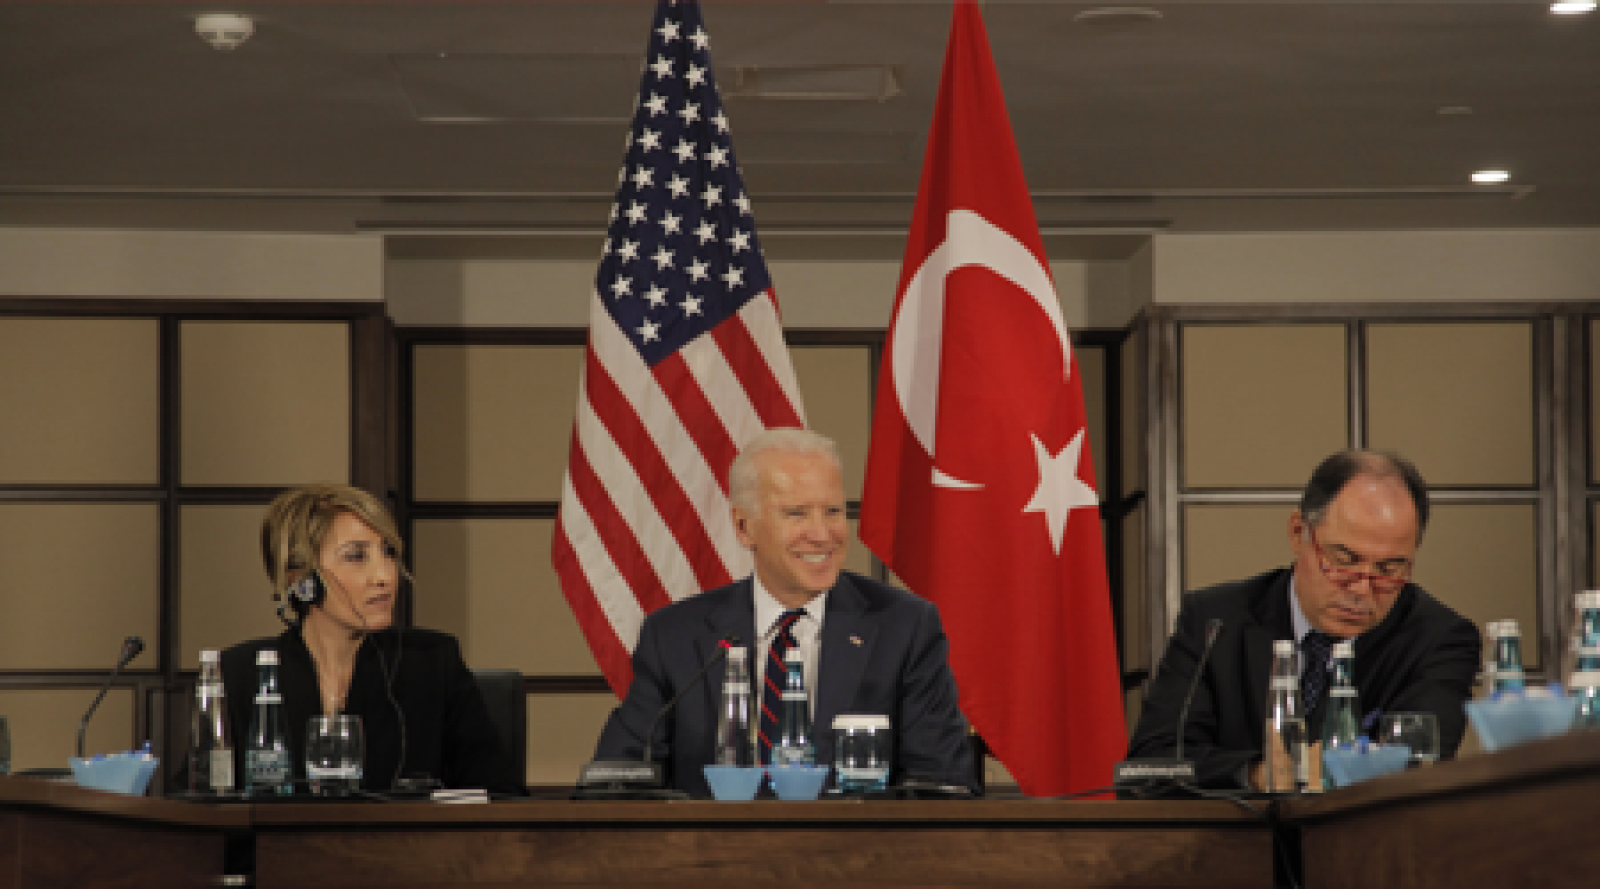 Vice President Biden Discusses Value of Checks and Balances in Visit to Turkey